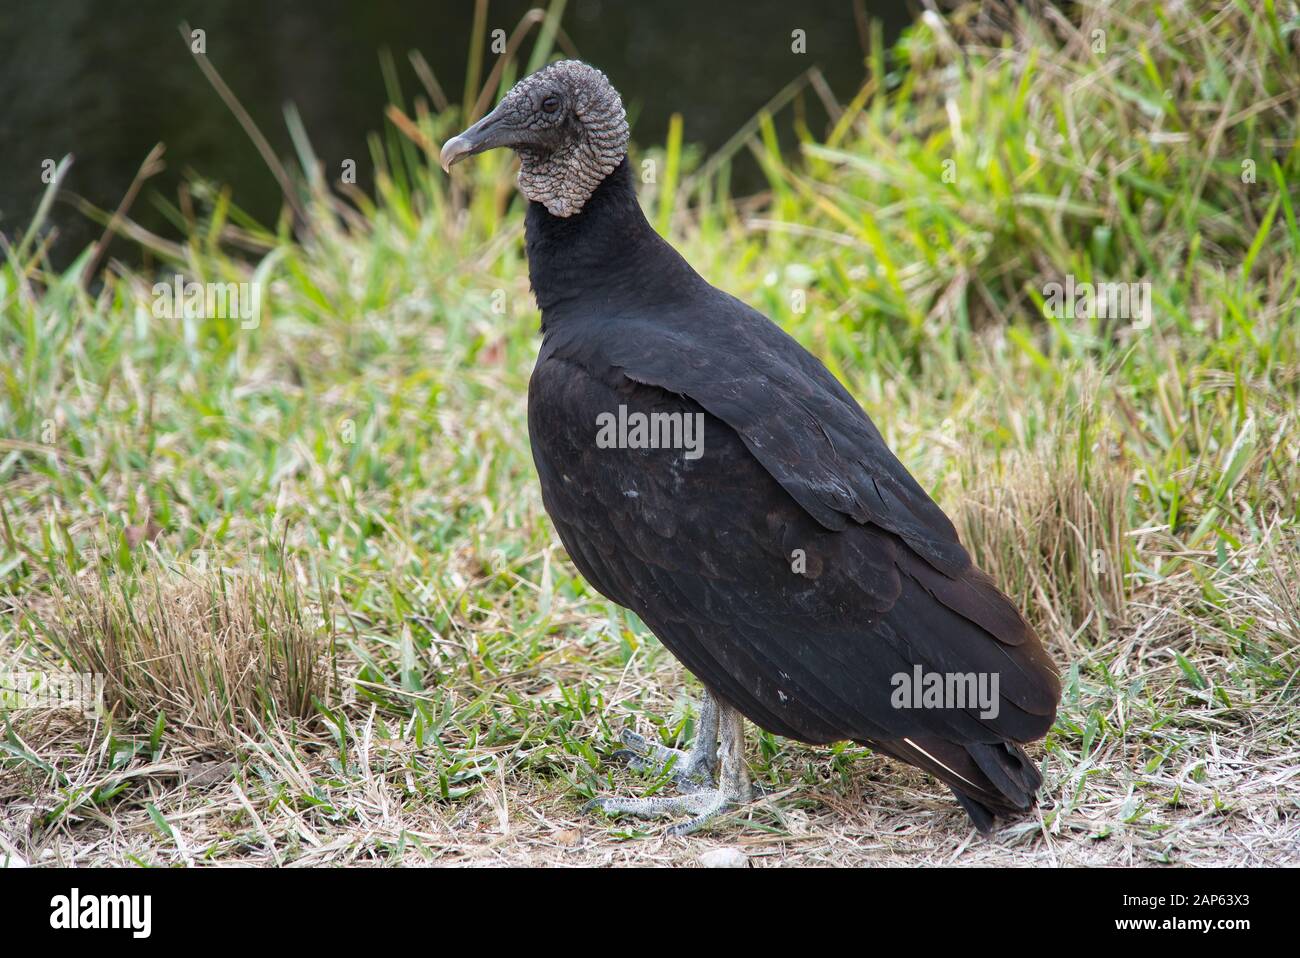 American Black Vulture sits on a wood close up Stock Photo